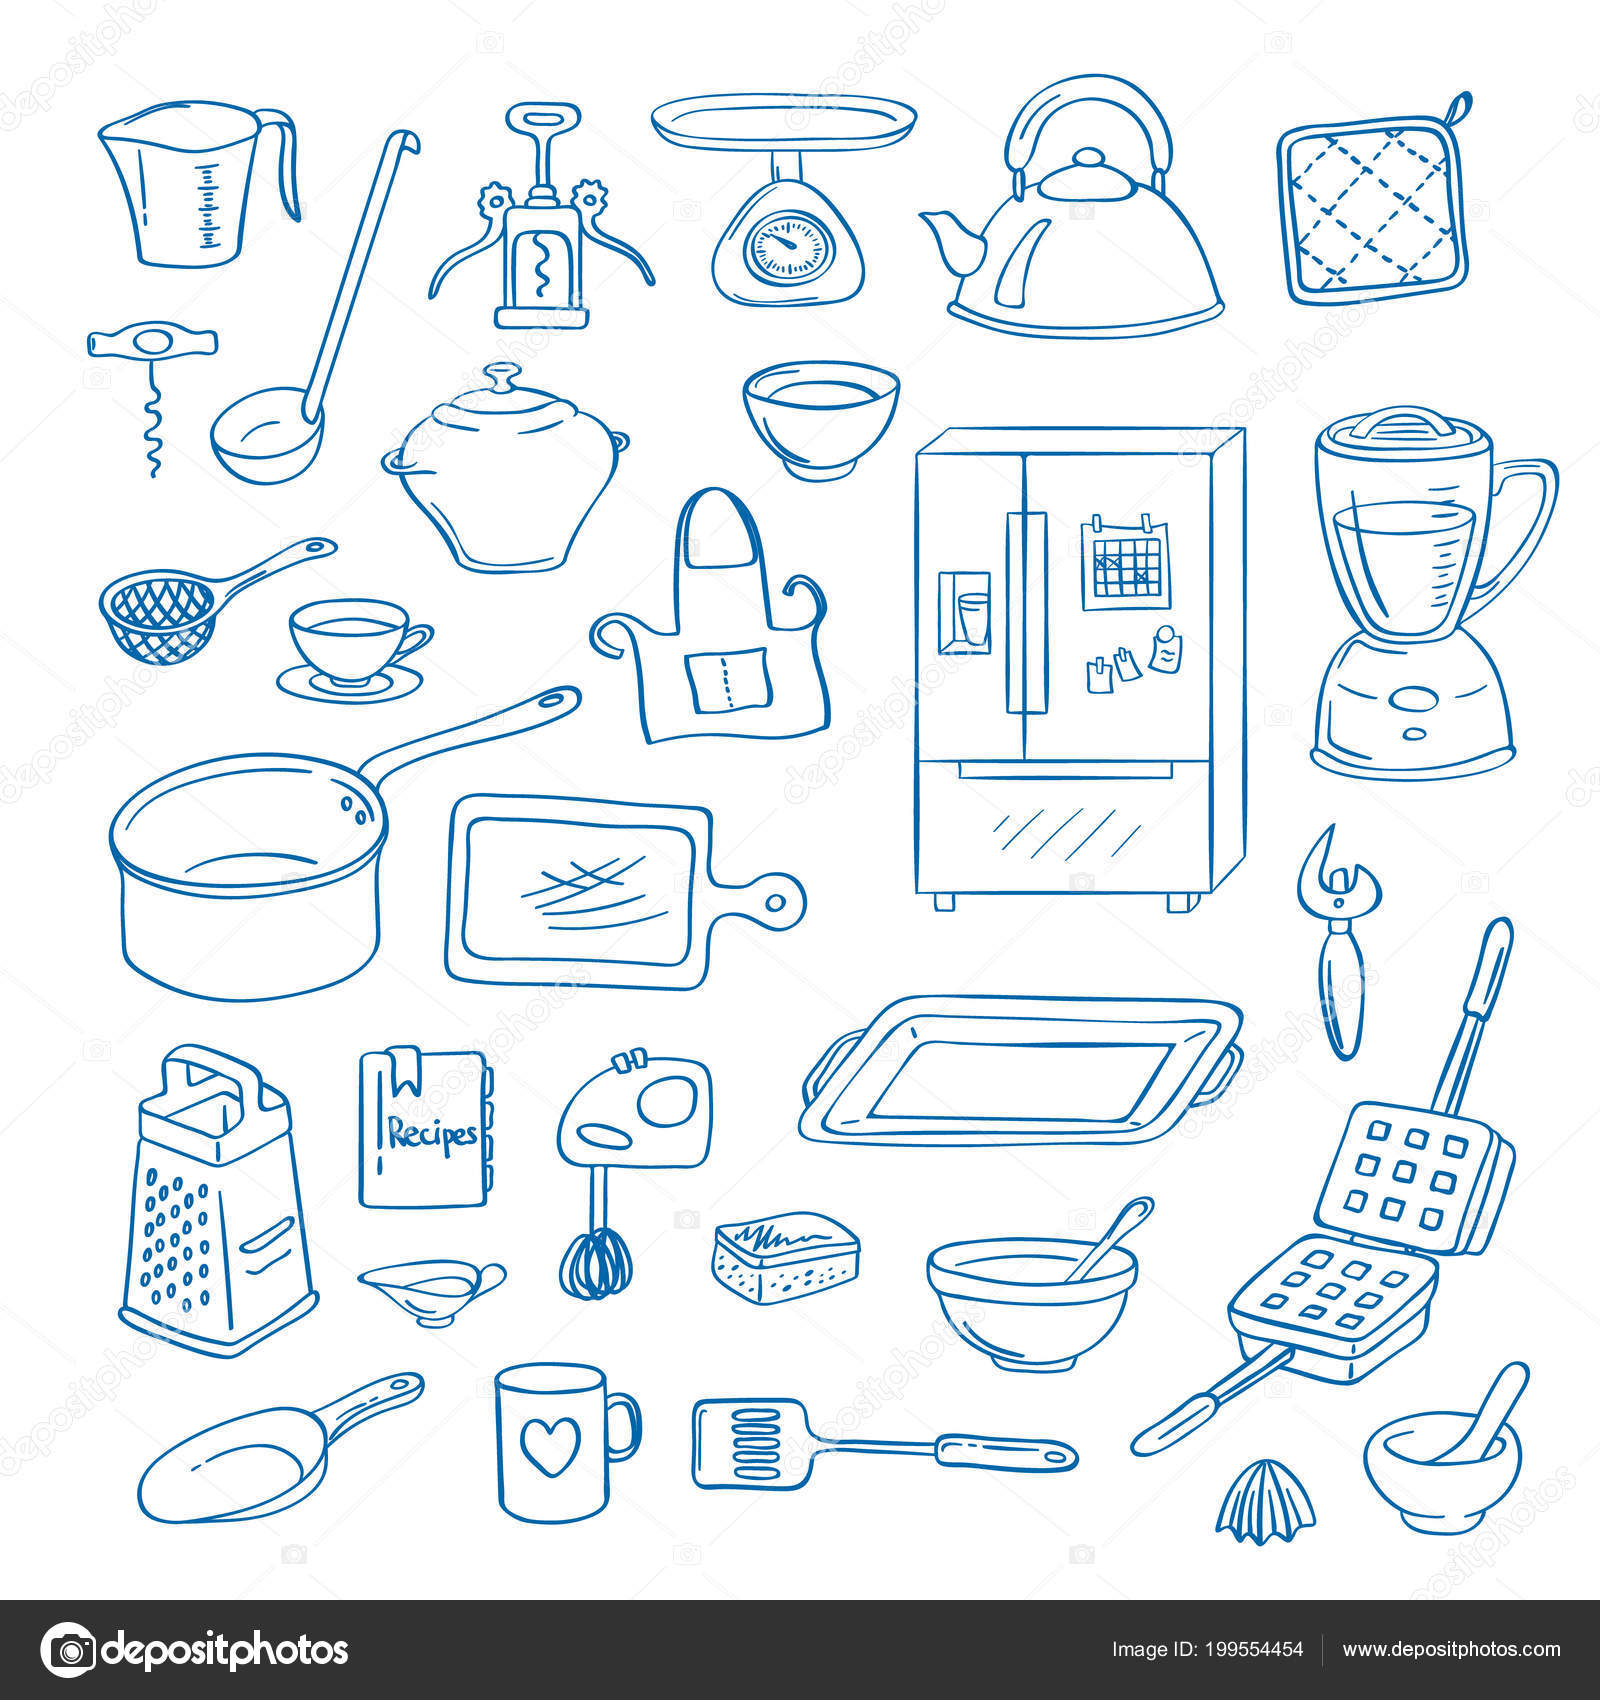 Kitchenware Icons Vector Set. Cute Kitchen Utensils Doodle Hand Drawn  Style. Royalty Free SVG, Cliparts, Vectors, and Stock Illustration. Image  76868584.